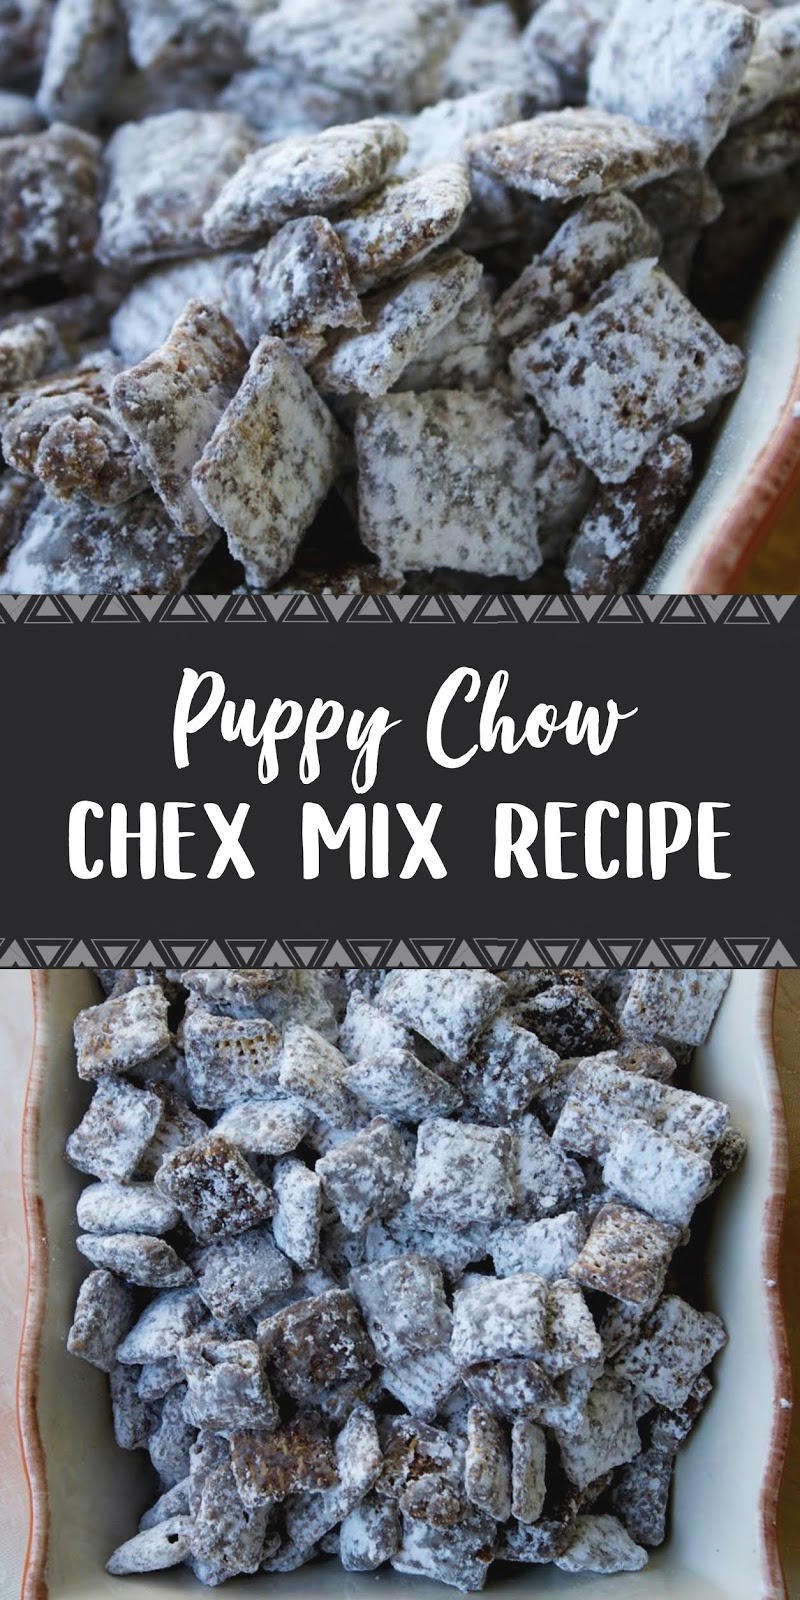 PUPPY CHOW CHEX MIX RECIPE - HEALTH and WELLNESS